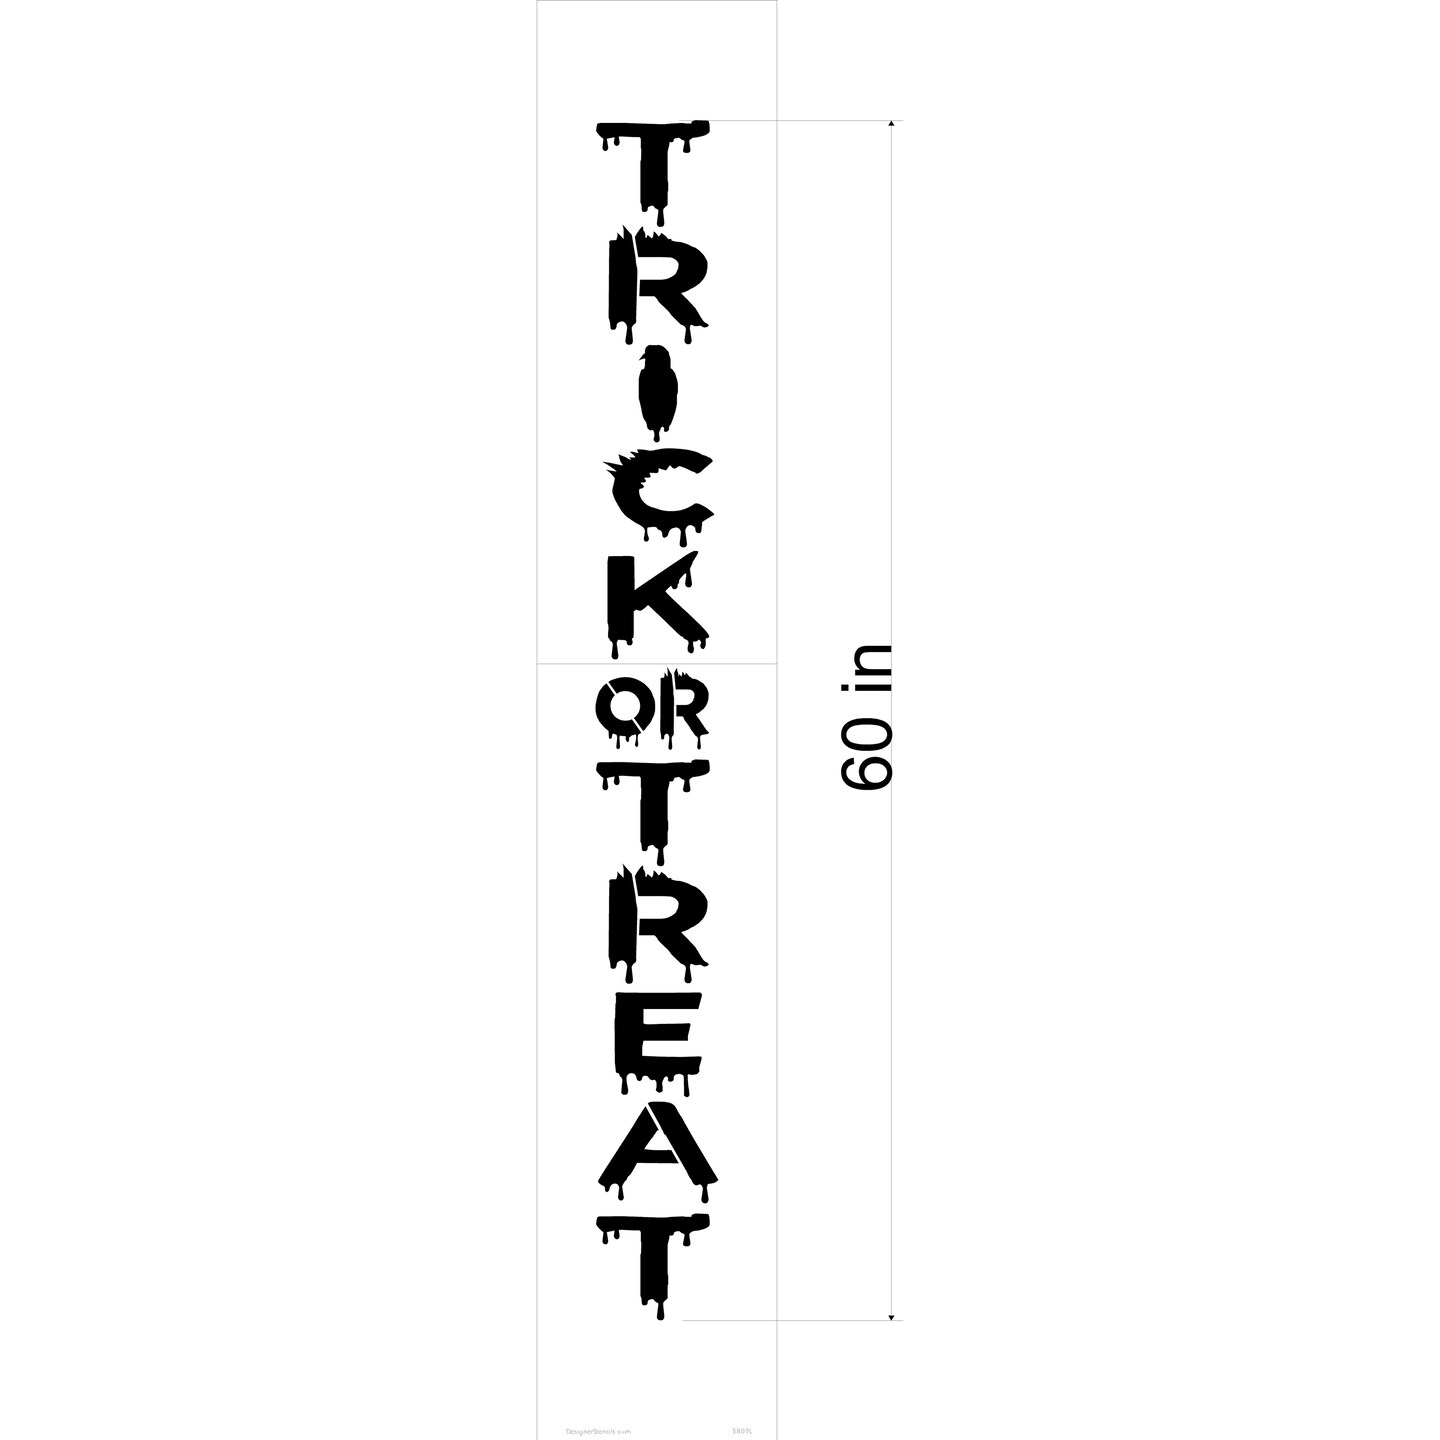 60-Inch Trick or Treat Tall Wall Stencil | 3809L by Designer Stencils | Word &#x26; Phrase Stencils | Reusable Art Craft Stencils for Painting on Walls, Canvas, Wood | Reusable Plastic Paint Stencil for Home Makeover | Easy to Use &#x26; Clean Art Stencil